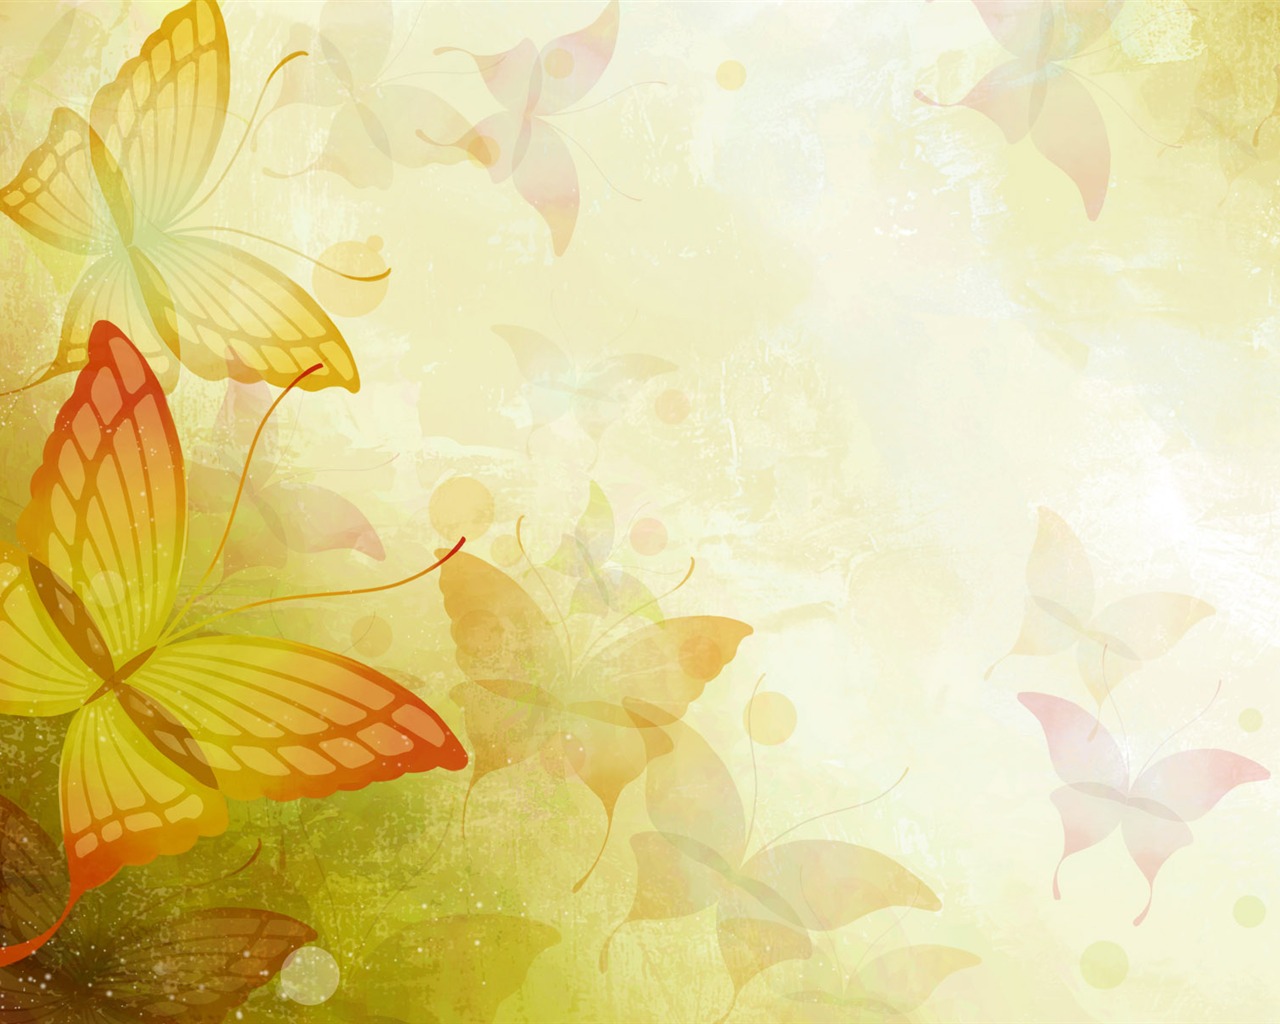 Synthetic Wallpaper Colorful Flower #11 - 1280x1024